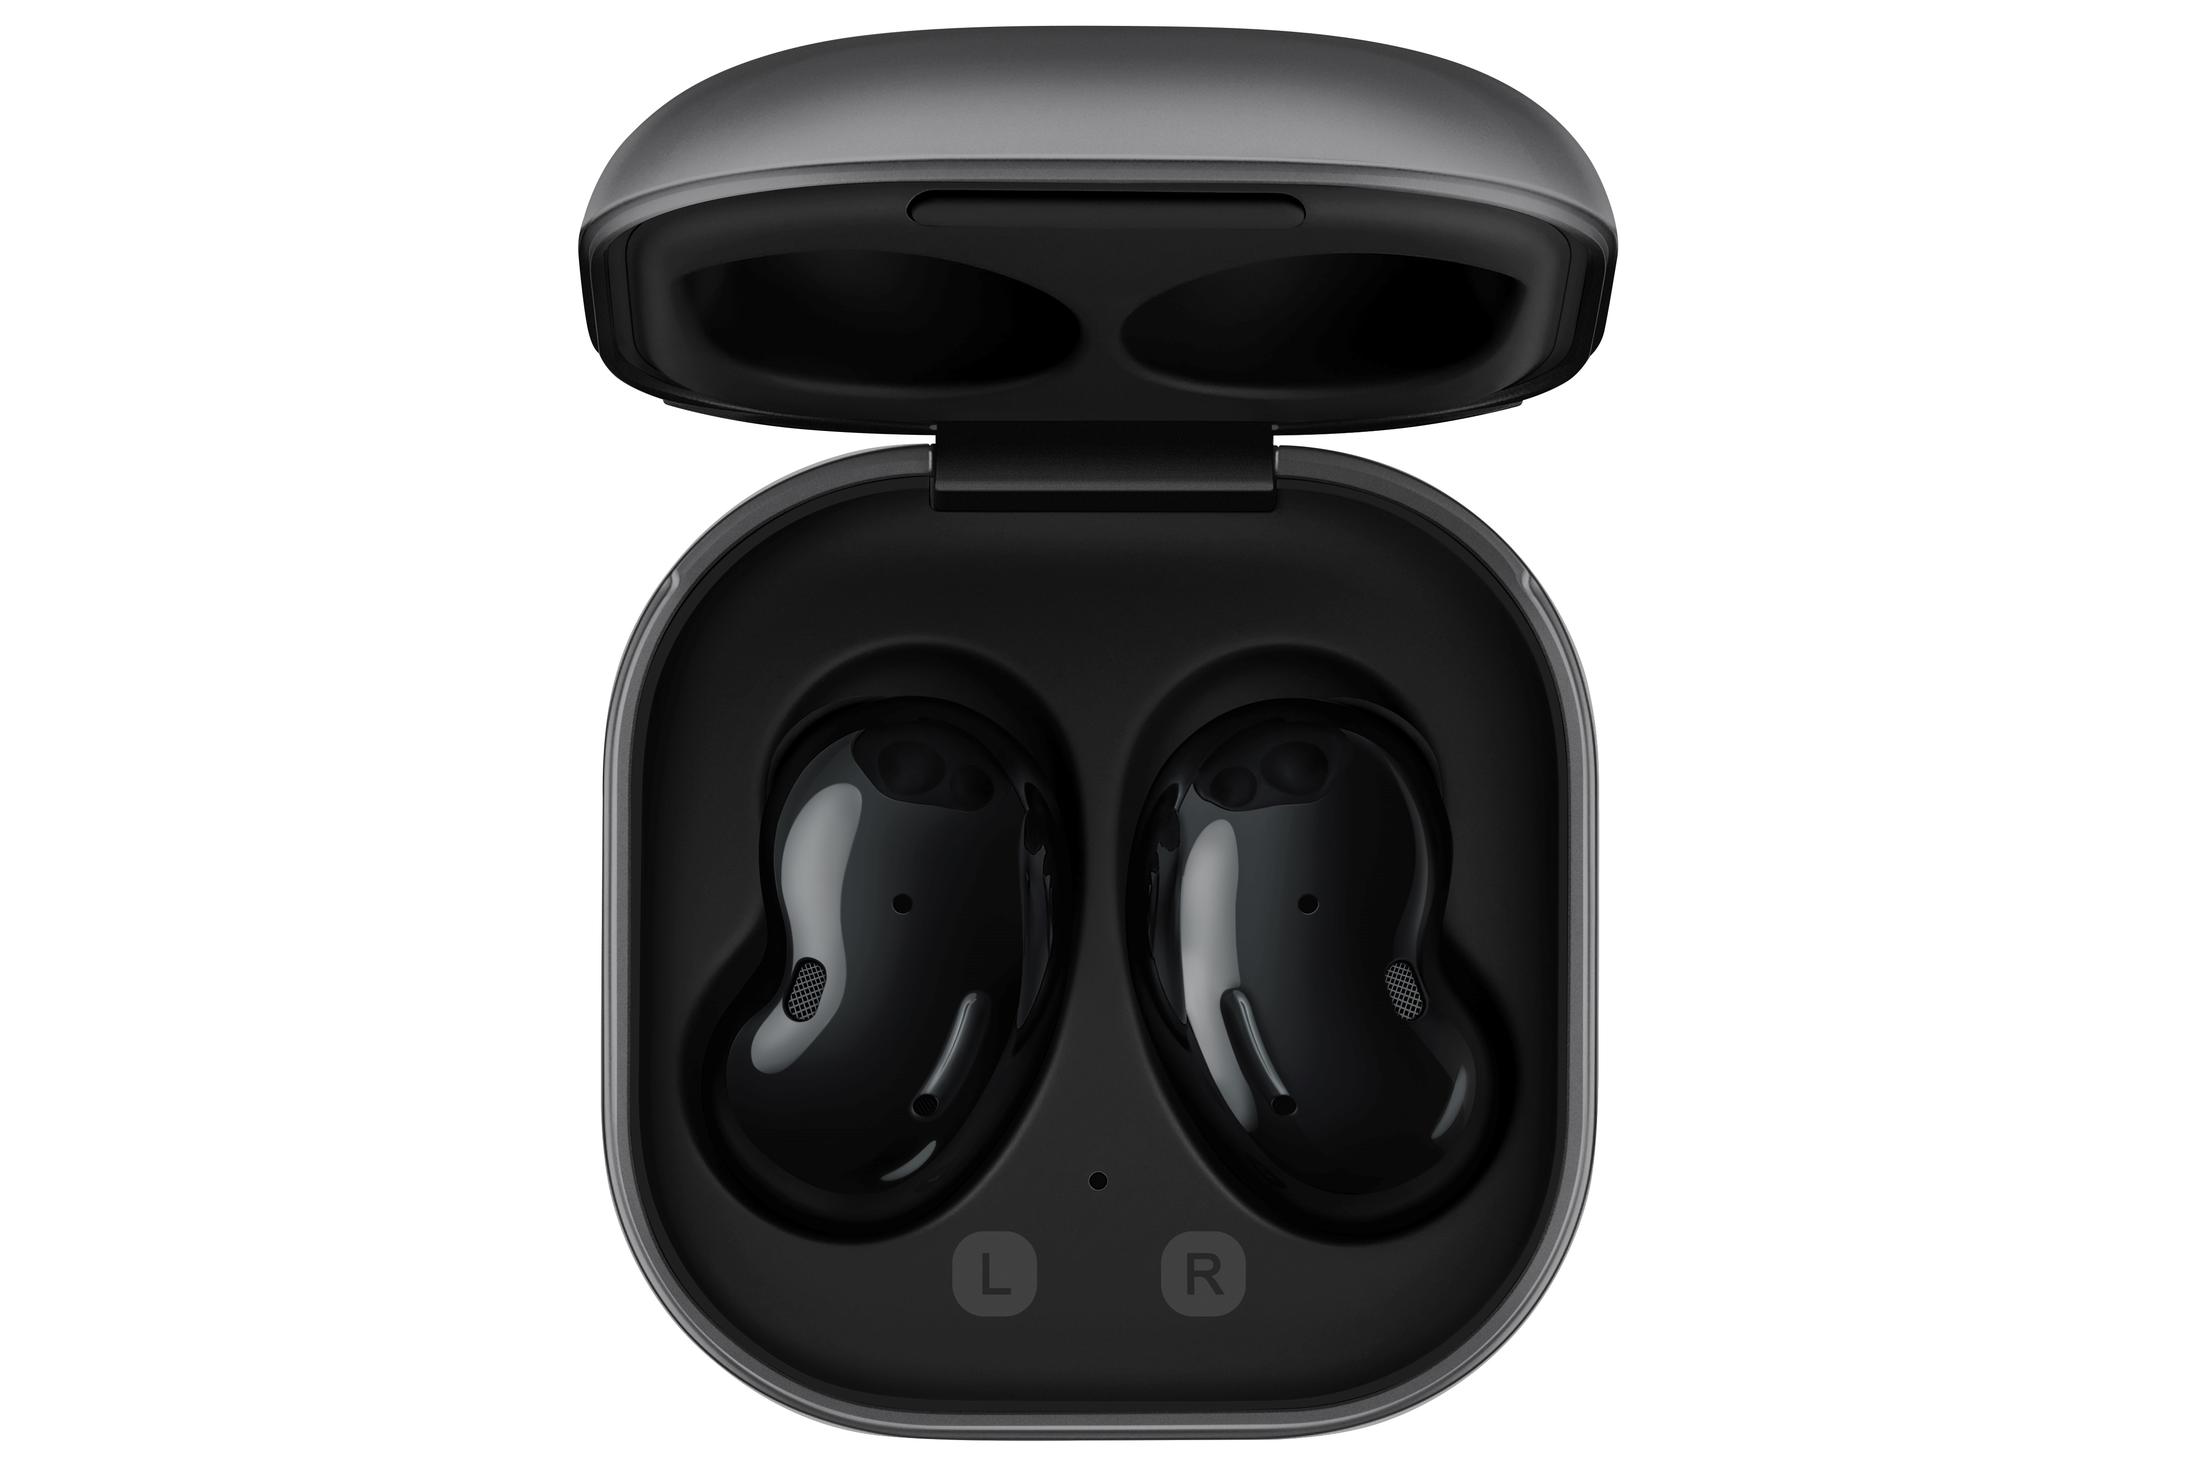 Samsung Galaxy Buds Live Bluetooth Earbuds, Noise Canceling and True Wireless, Onyx Black - image 11 of 12